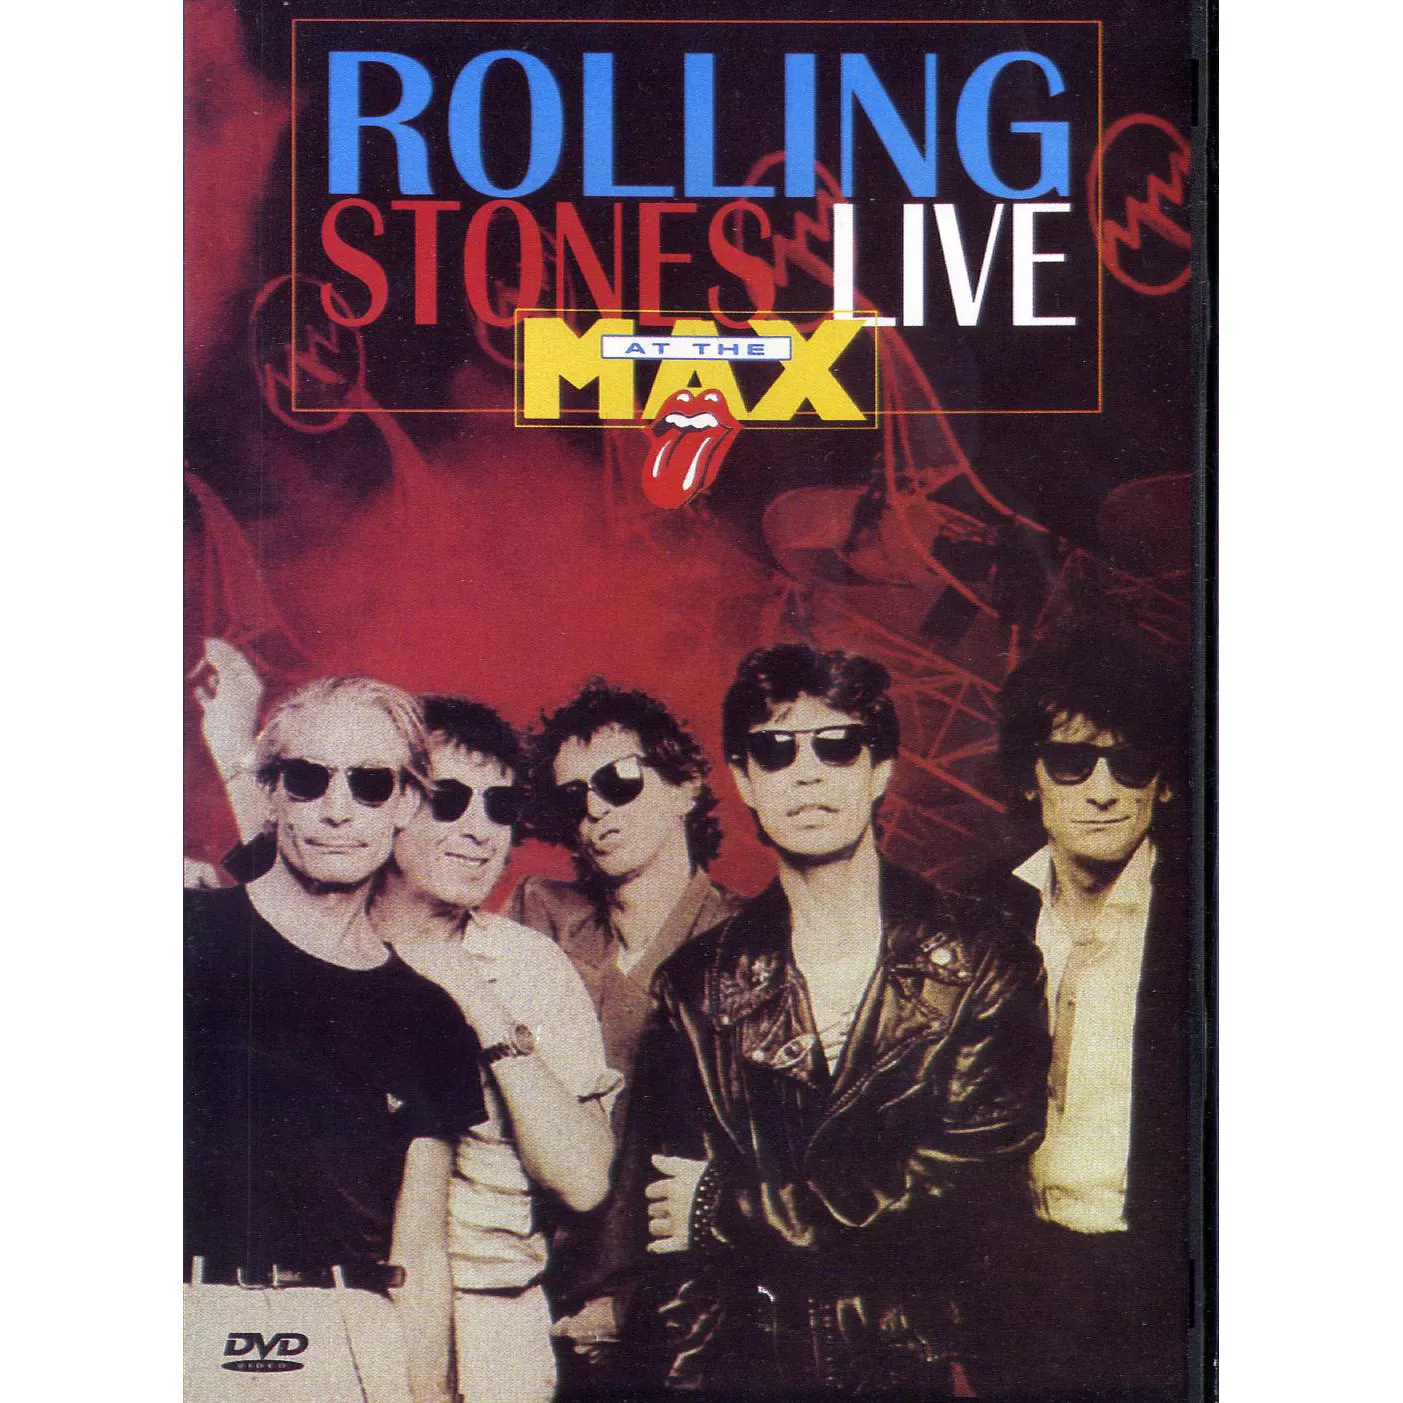 Live At The Max - The Rolling Stones